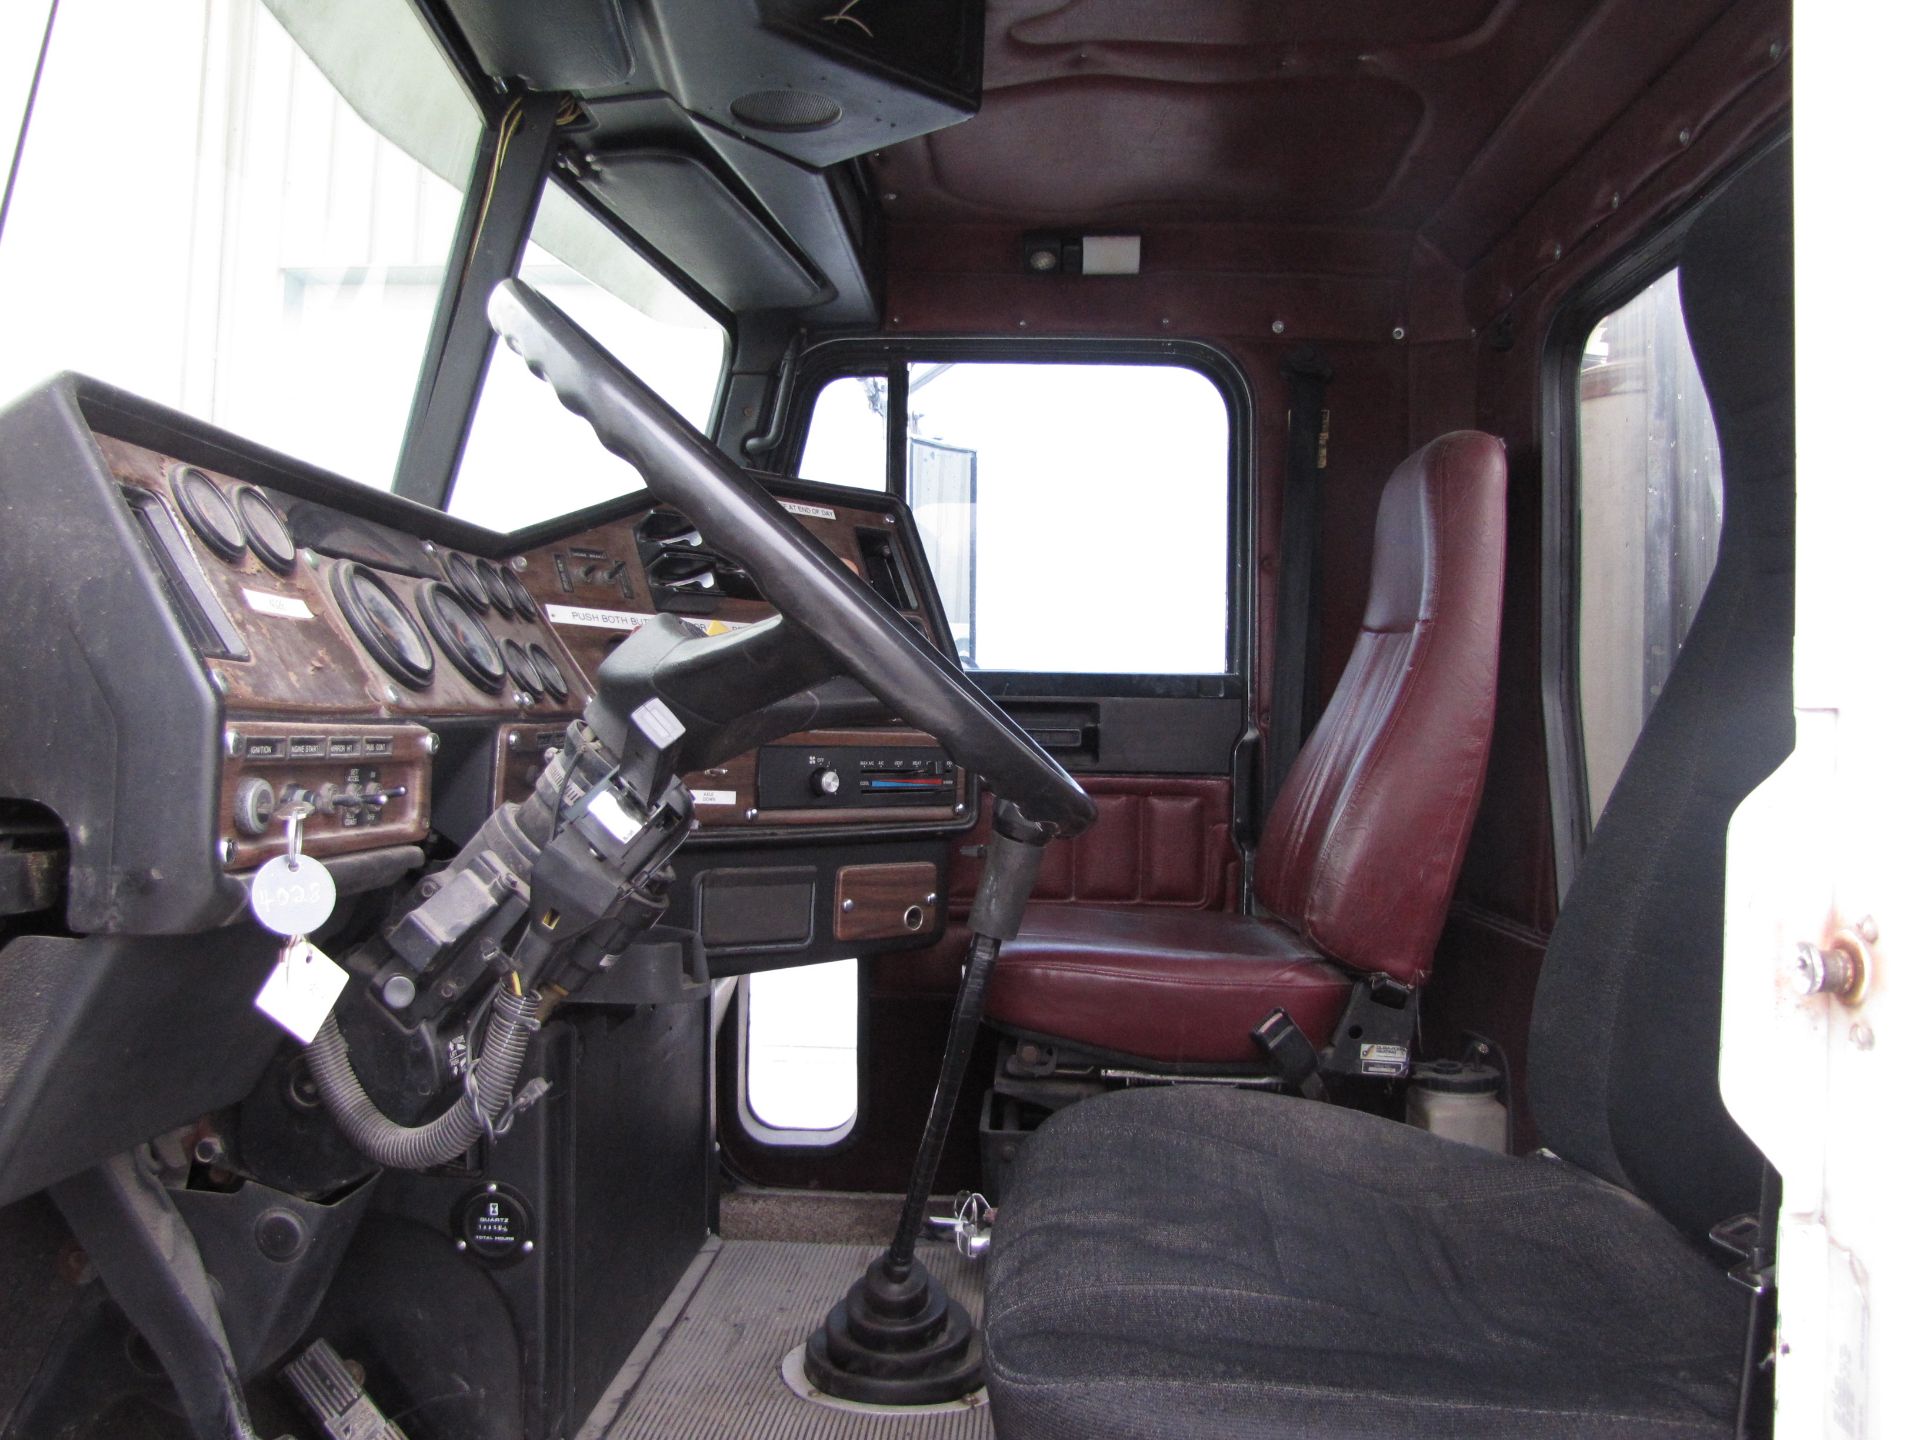 1993 Freightliner FLD120 semi truck - Image 59 of 71